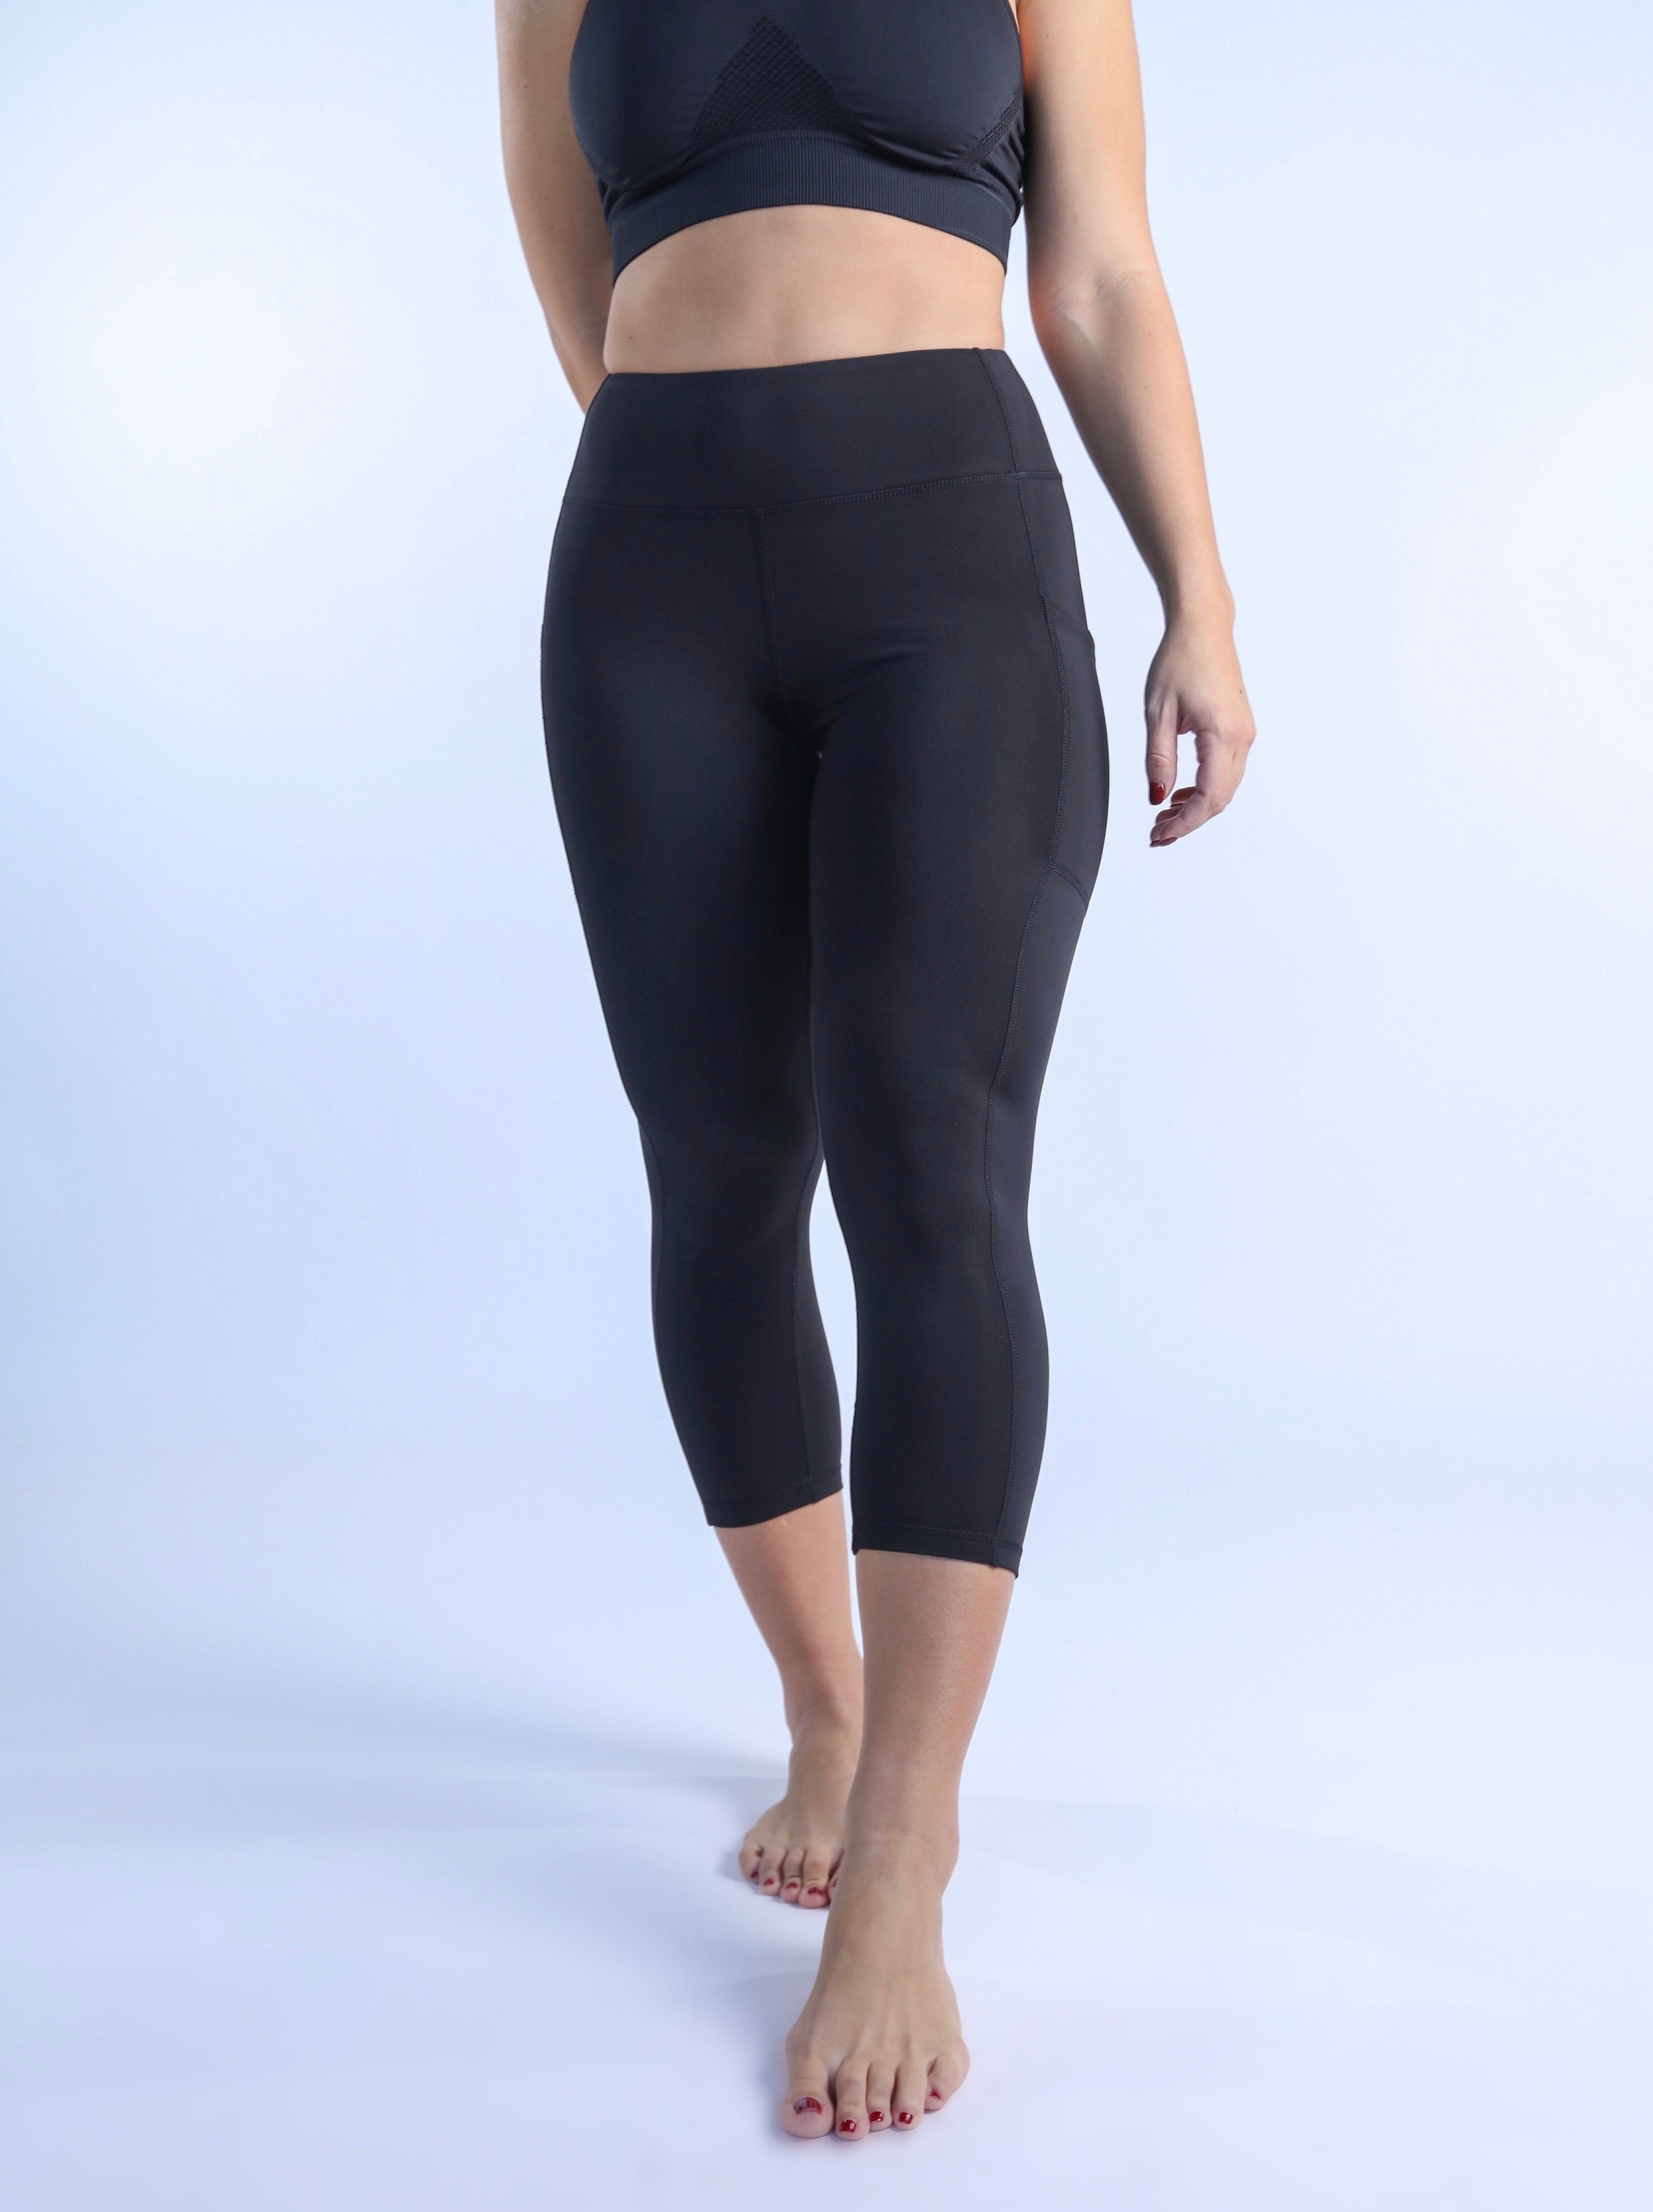 Capri Leggings With Pockets for Women Peach Breathable Clothes